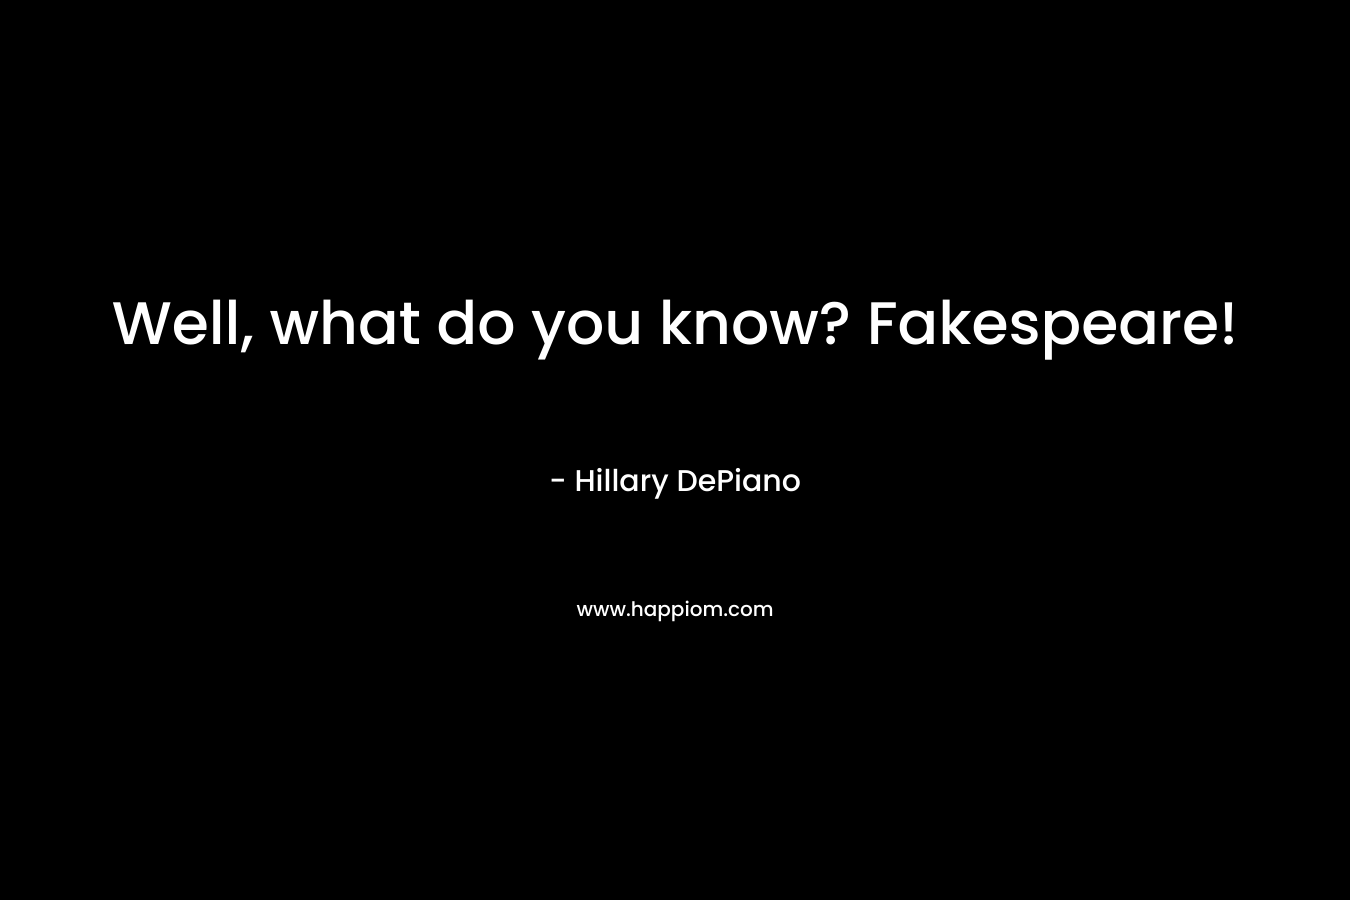 Well, what do you know? Fakespeare! – Hillary DePiano